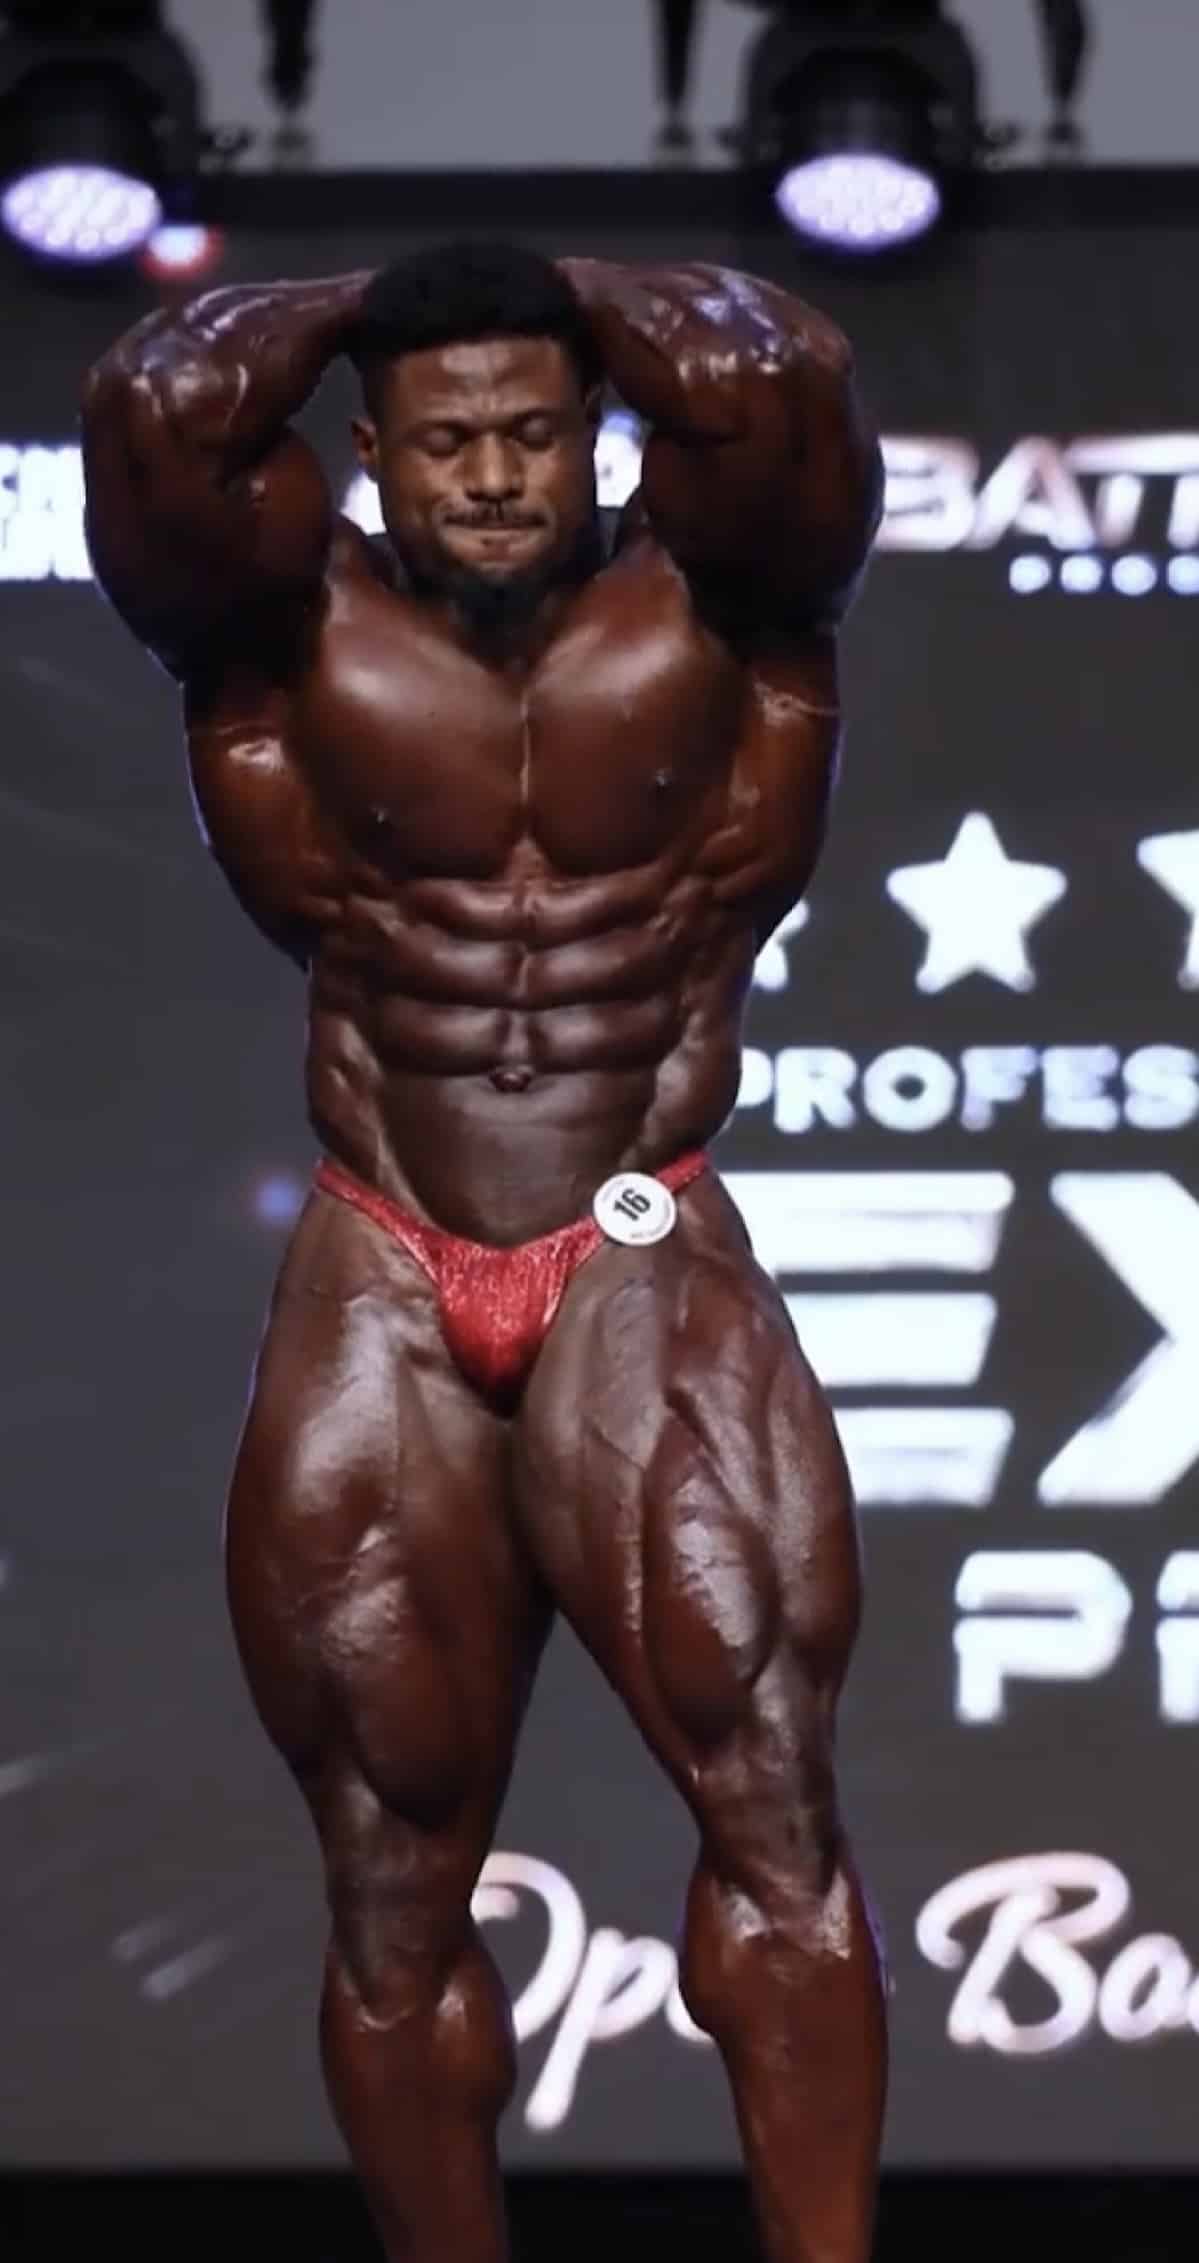 After Dominating at the Texas Pro, Andrew Jacked Could Be The Future of Bodybuilding